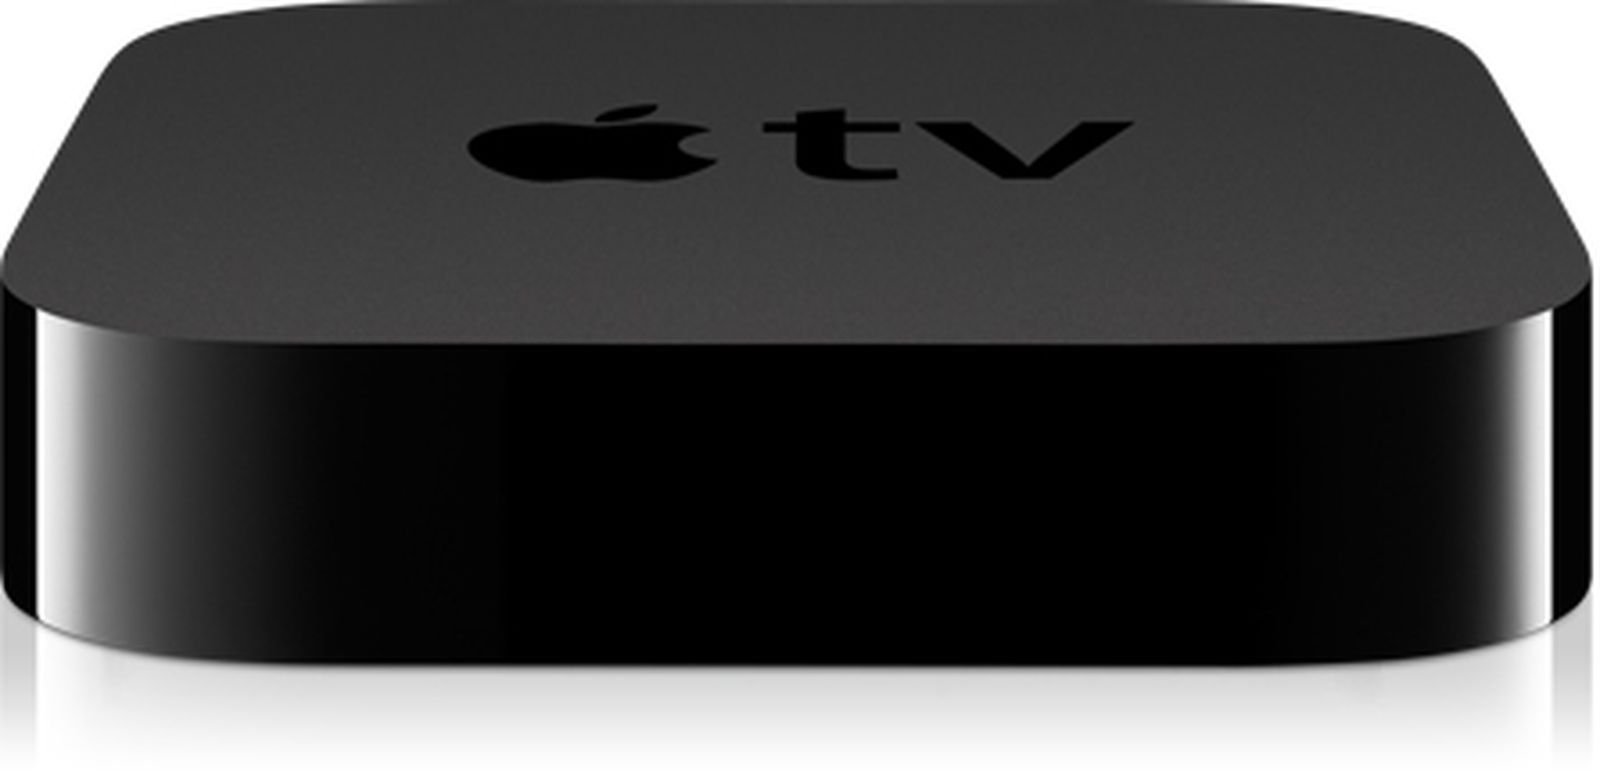 CBS News Launches App For Apple TV Featuring Siri Support